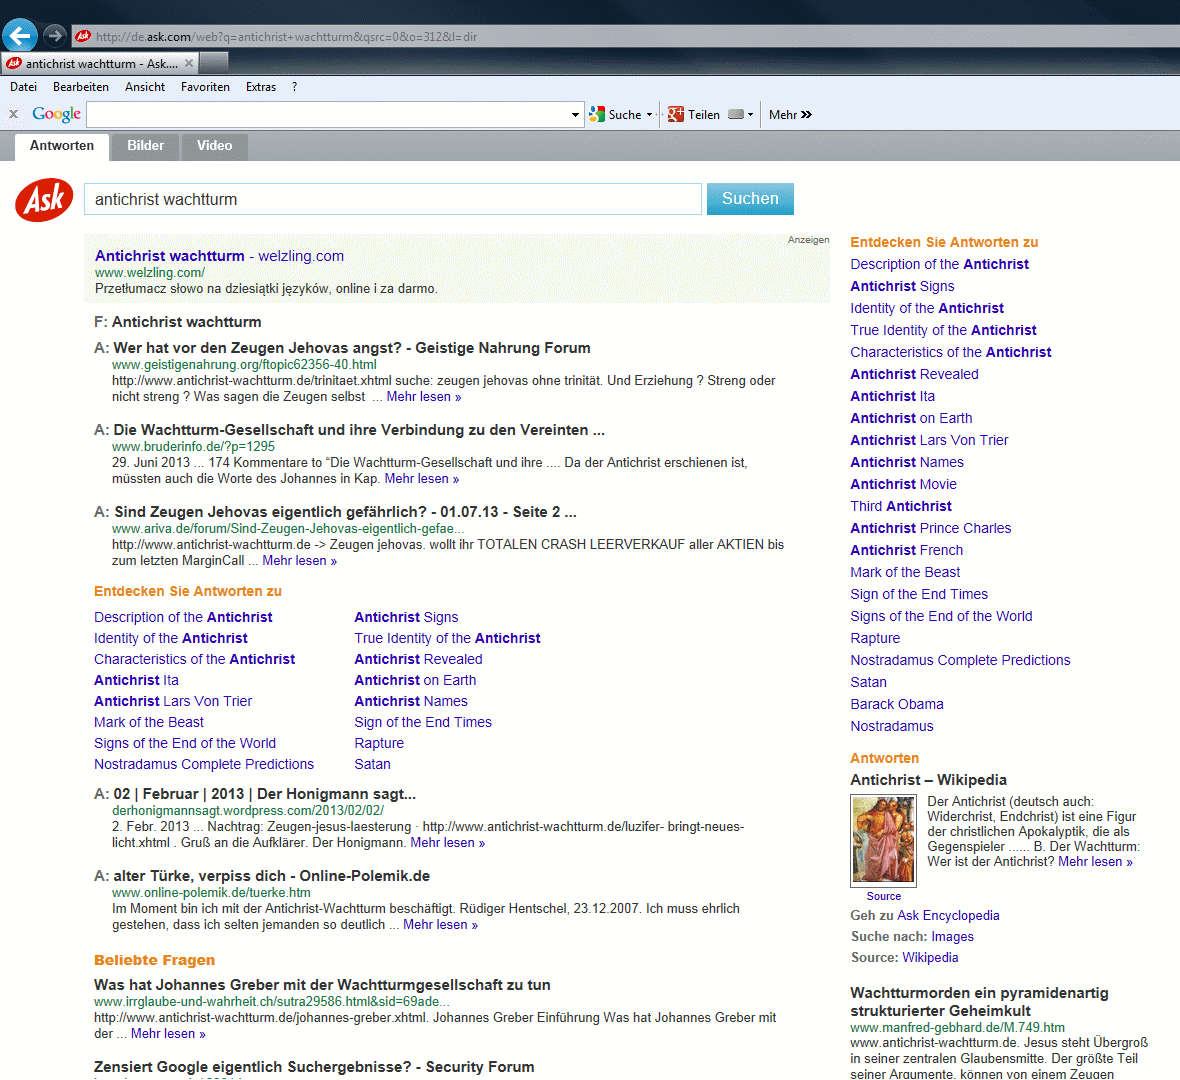 Does the Watchtower Society manipulate the ask.com search engine?